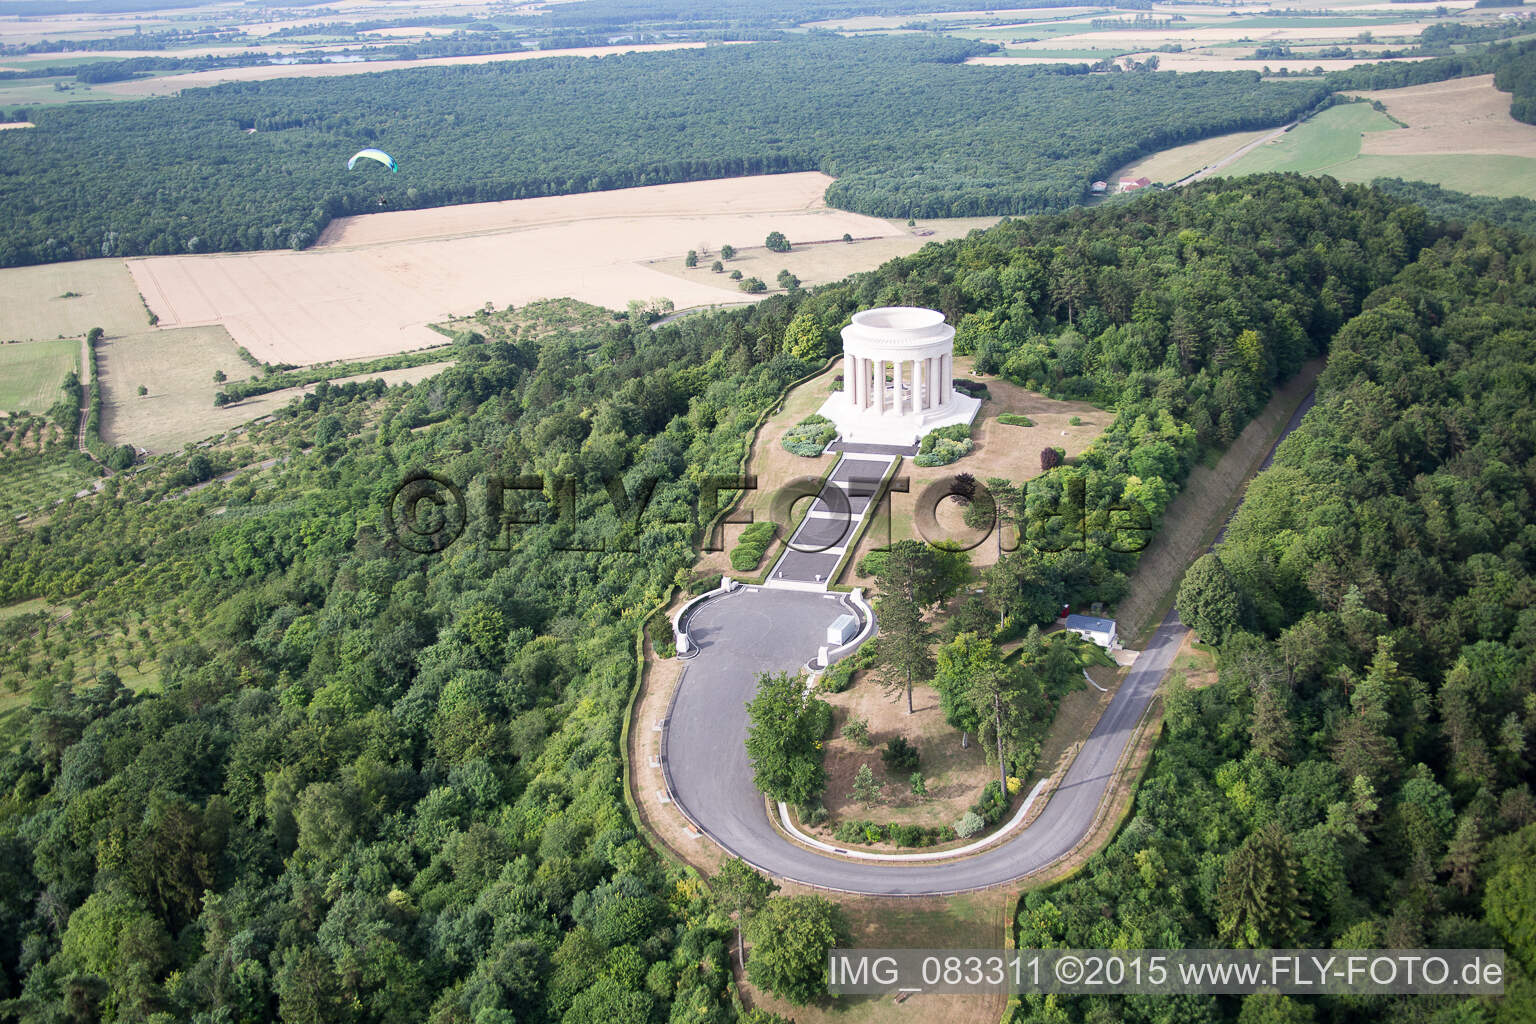 American War Memorial in Montsec in the state Meuse, France viewn from the air